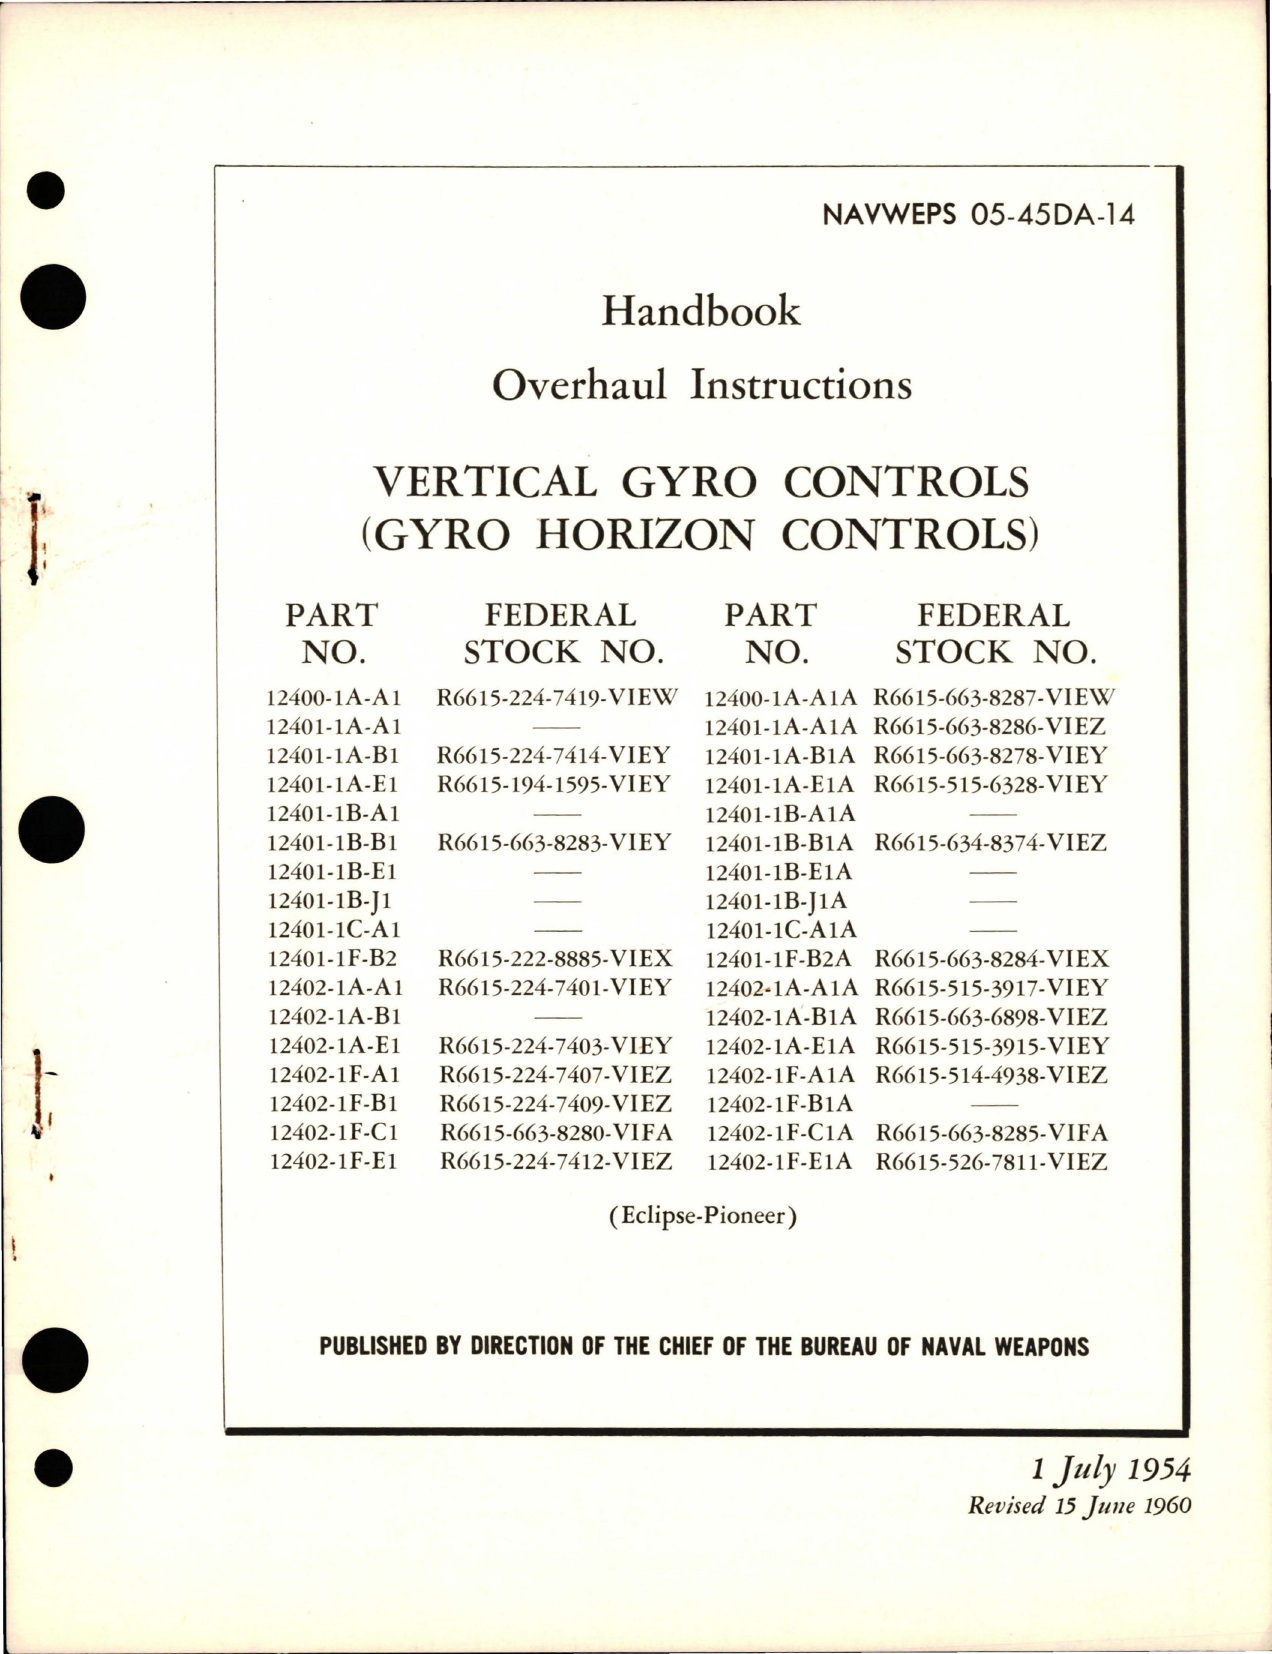 Sample page 1 from AirCorps Library document: Overhaul Instructions for Vertical Gyro Controls